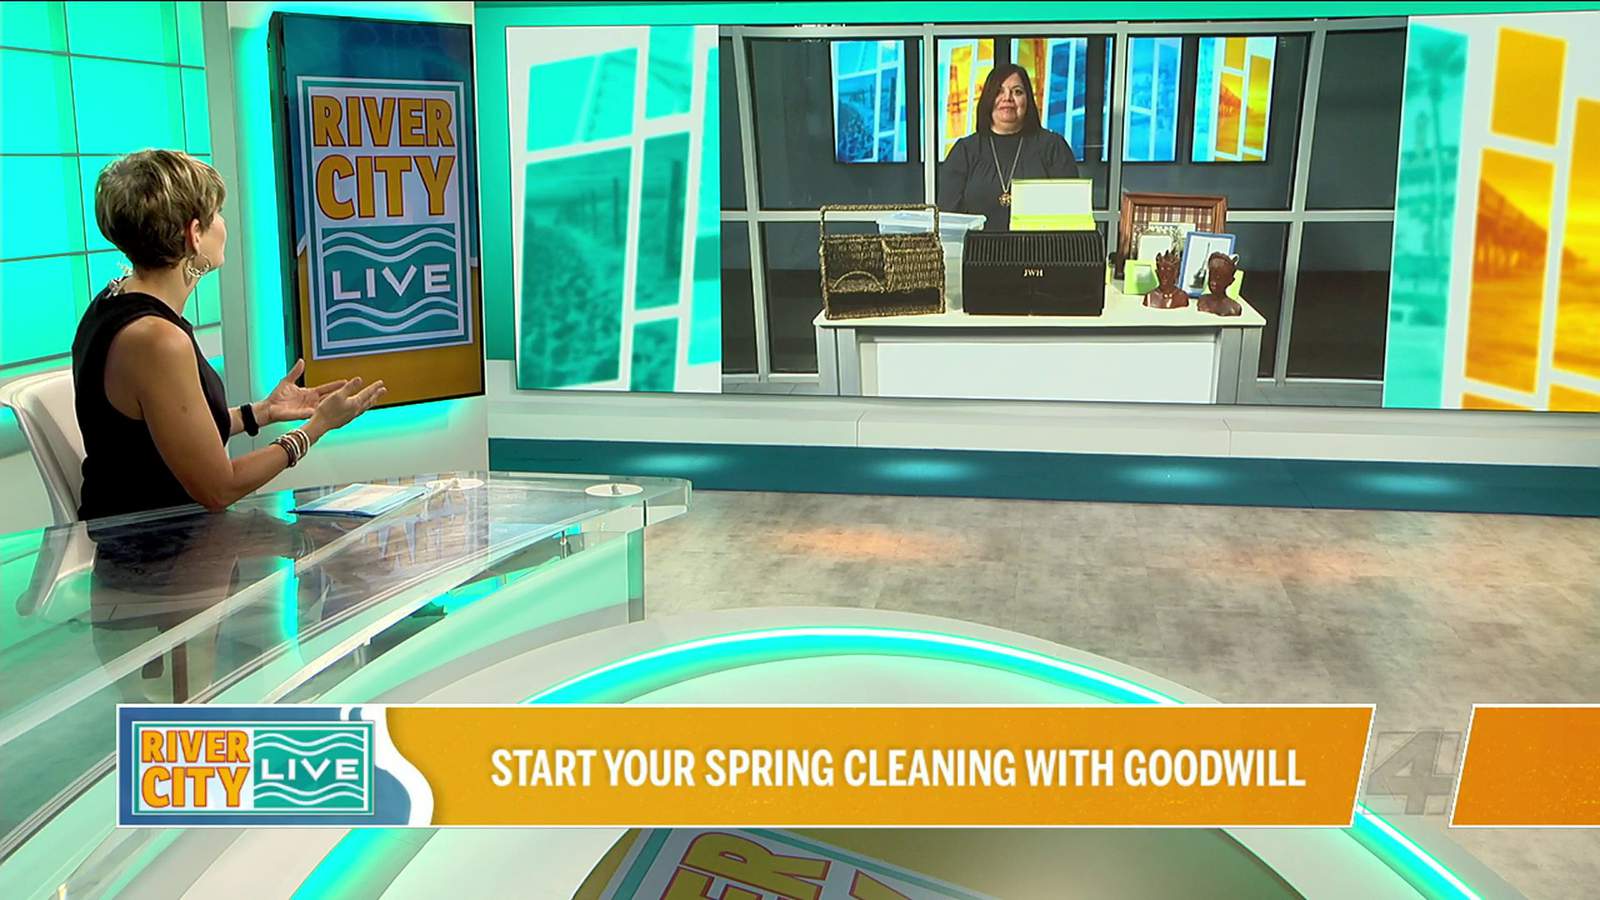 Start Your Spring Cleaning with Goodwill | River City Live